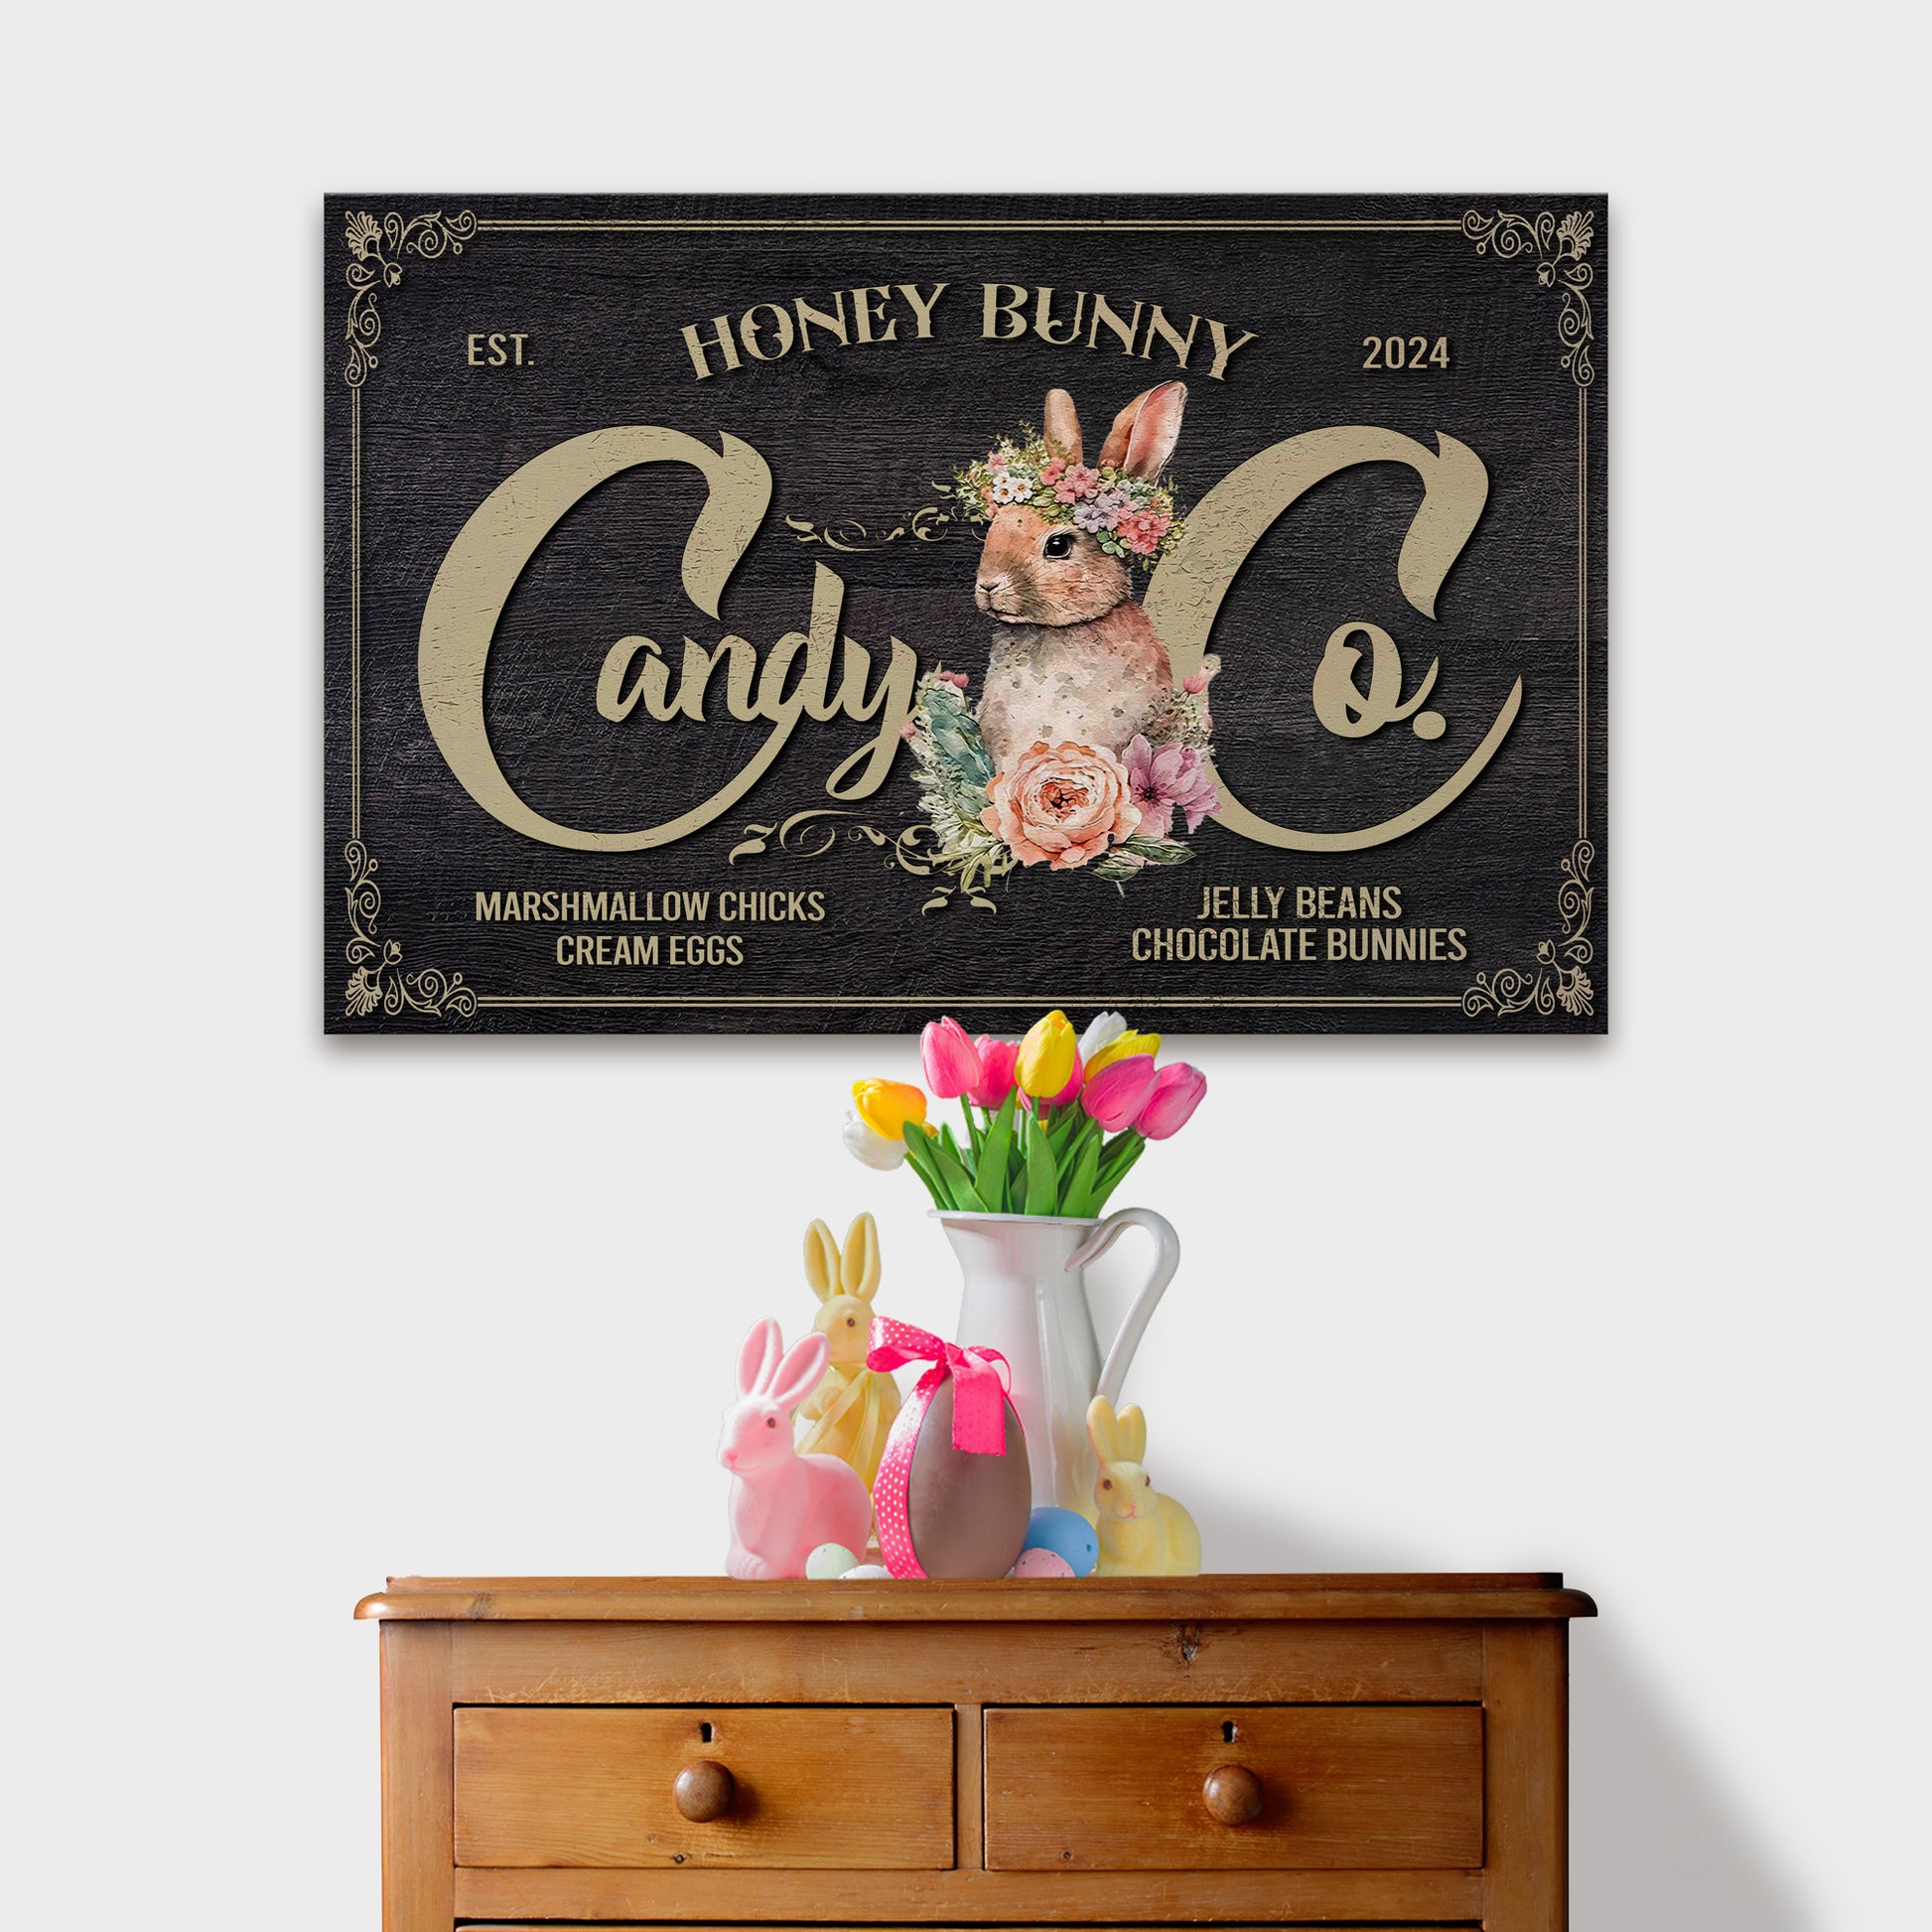 Honey Bunny Candy Company Sign III  - Image by Tailored Canvases